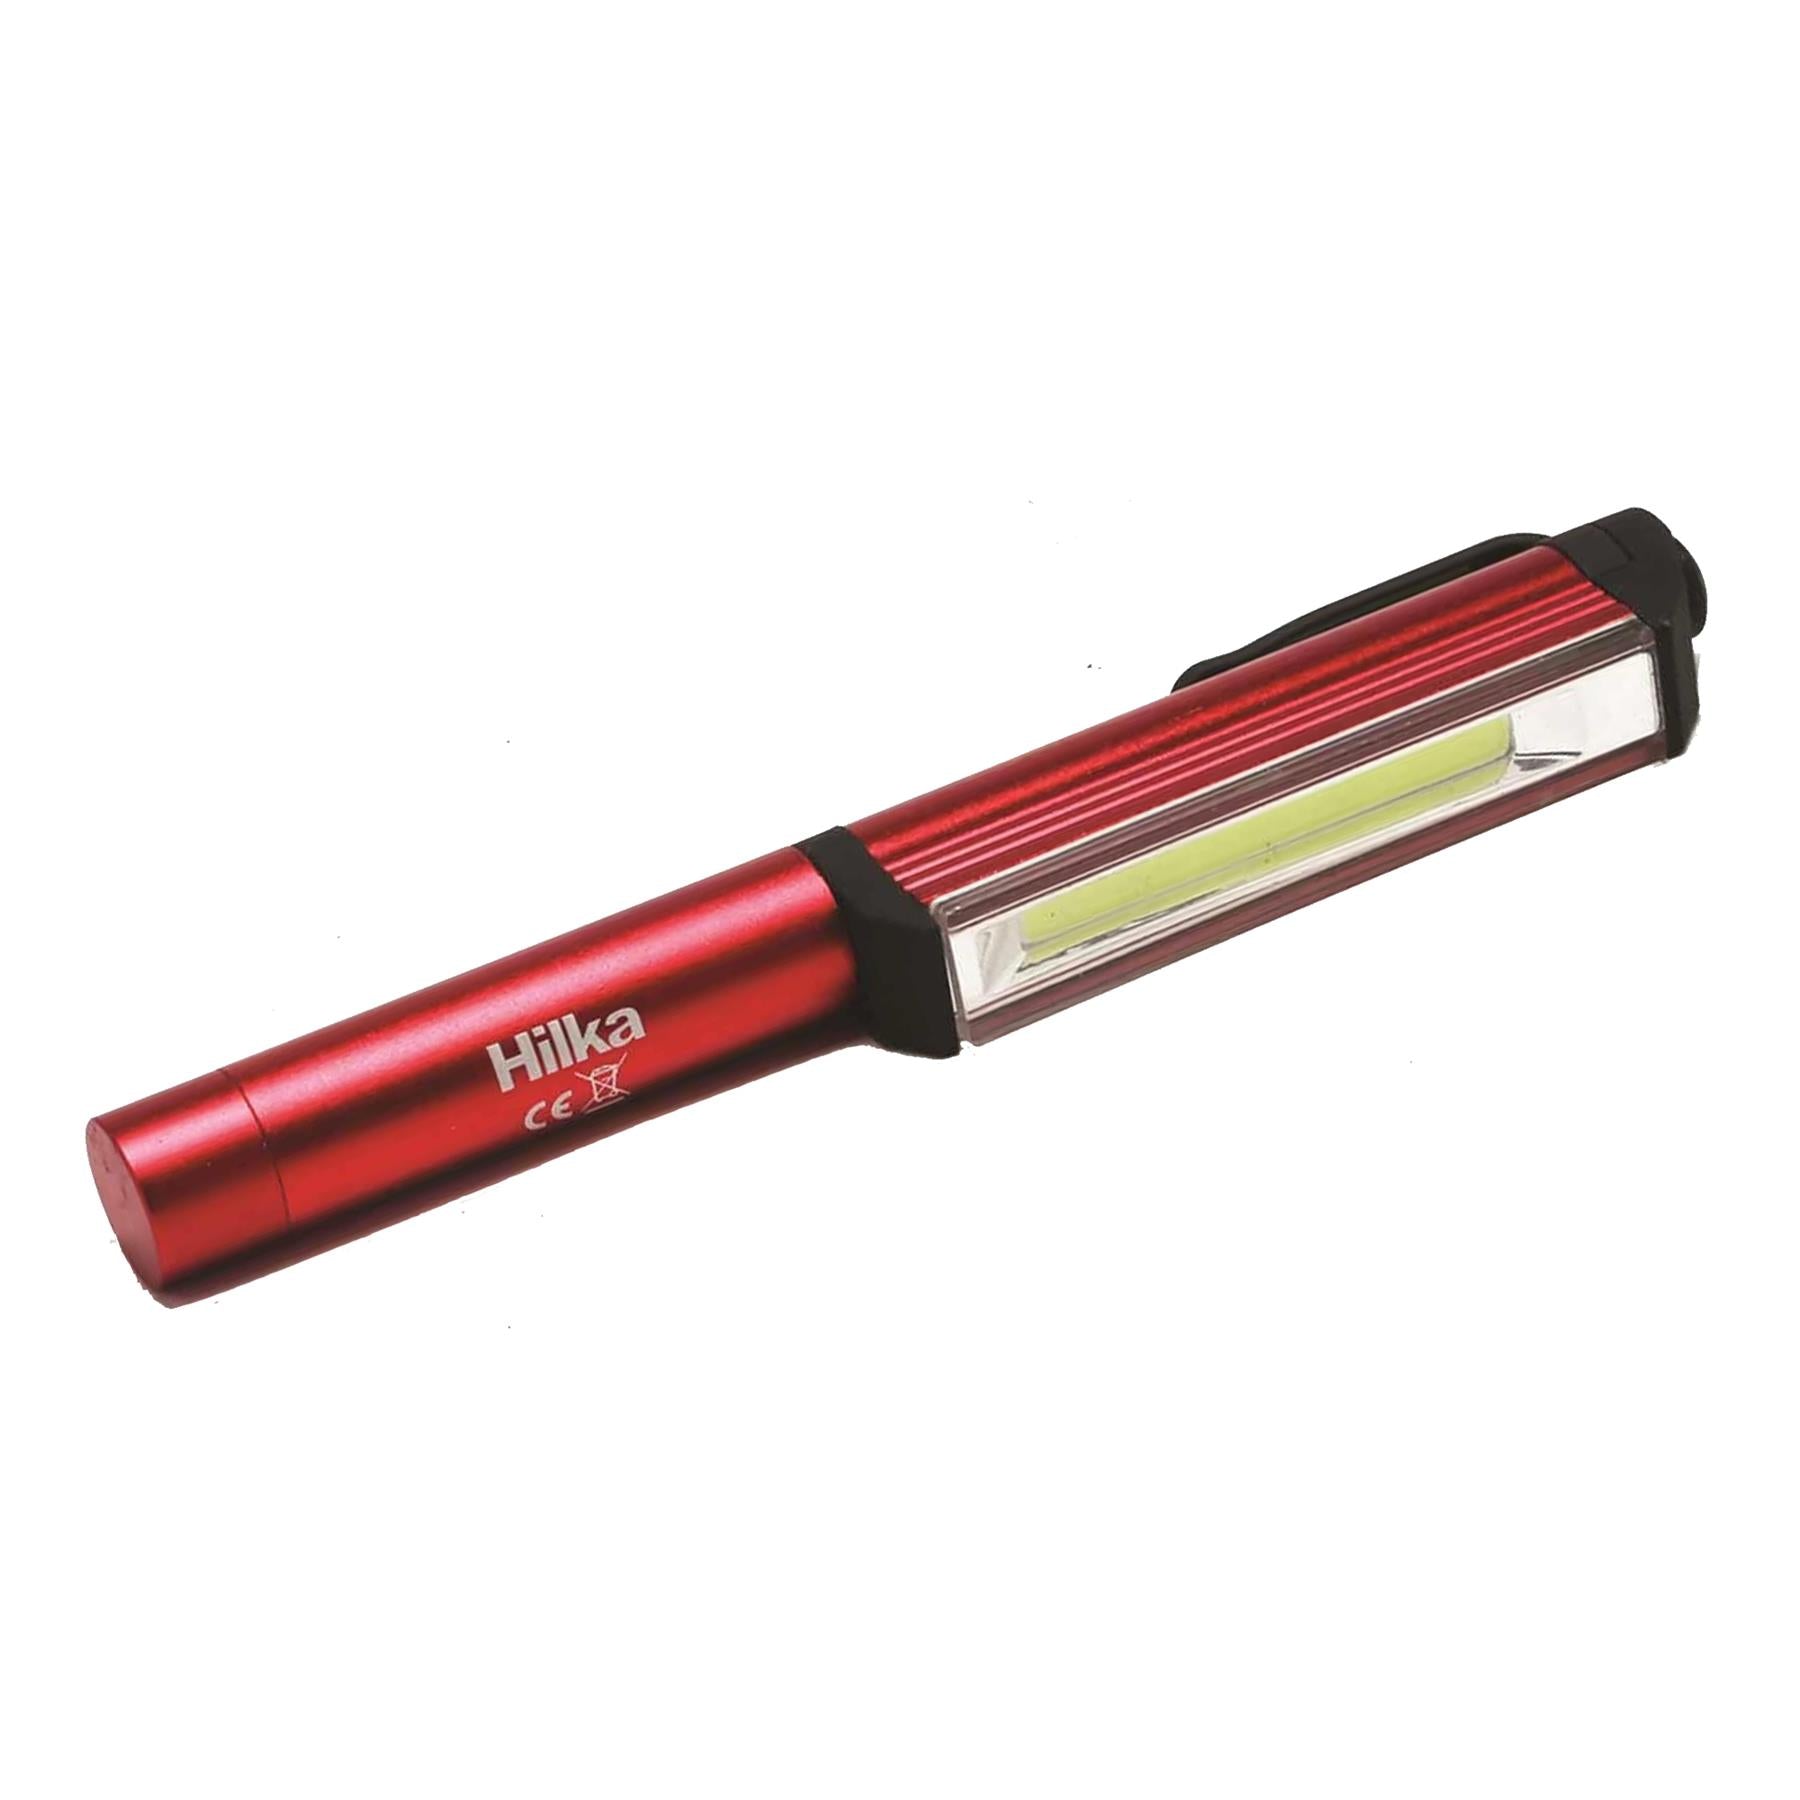 3W COB 200 Hilka Magnetic torch Lumens Pen Work Light with Batteries